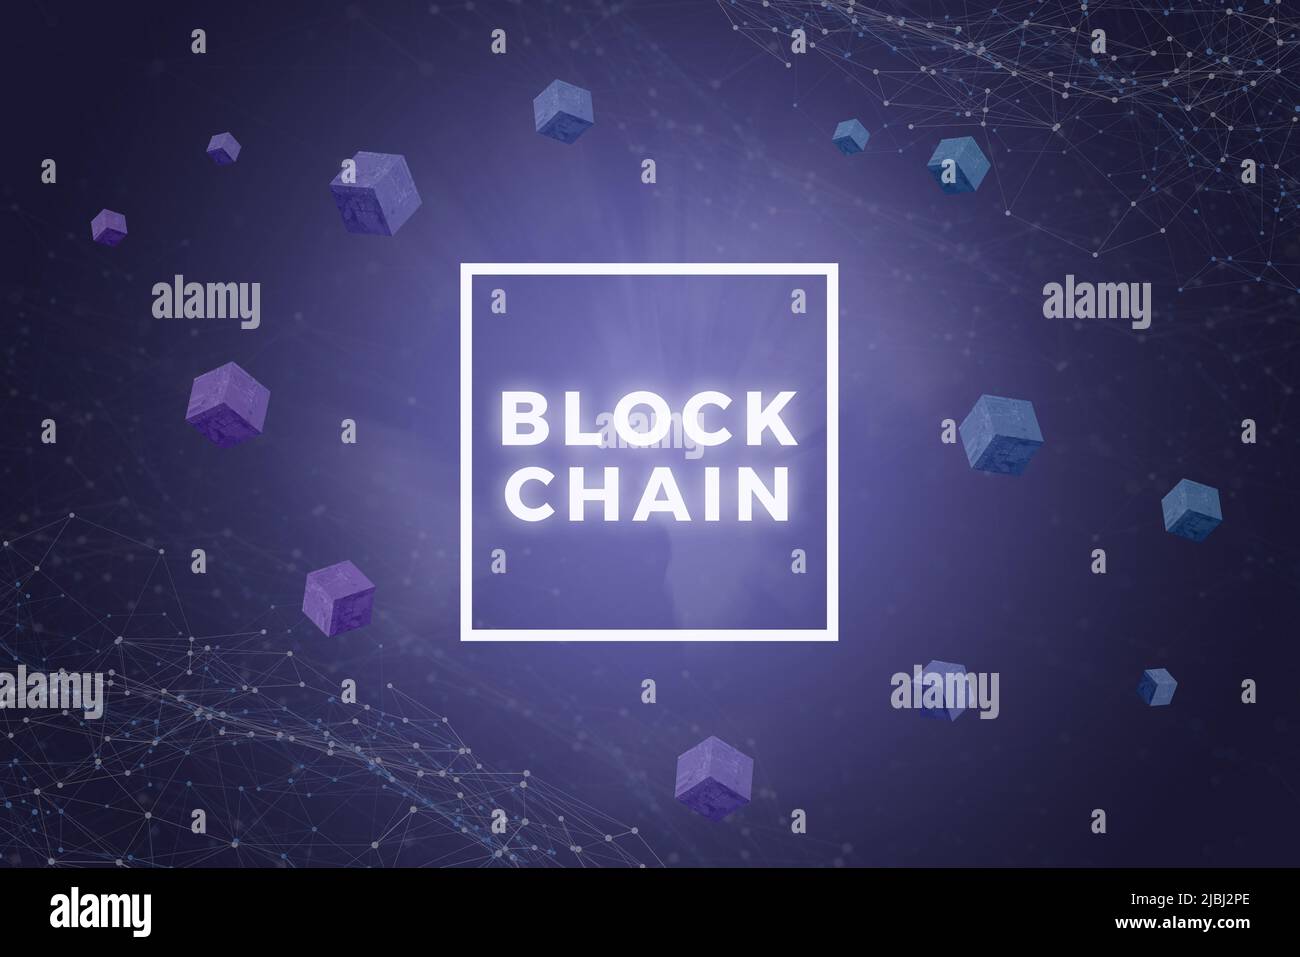 Blockchain network illustration with text in frame and blocks around. Network threads in background Stock Photo